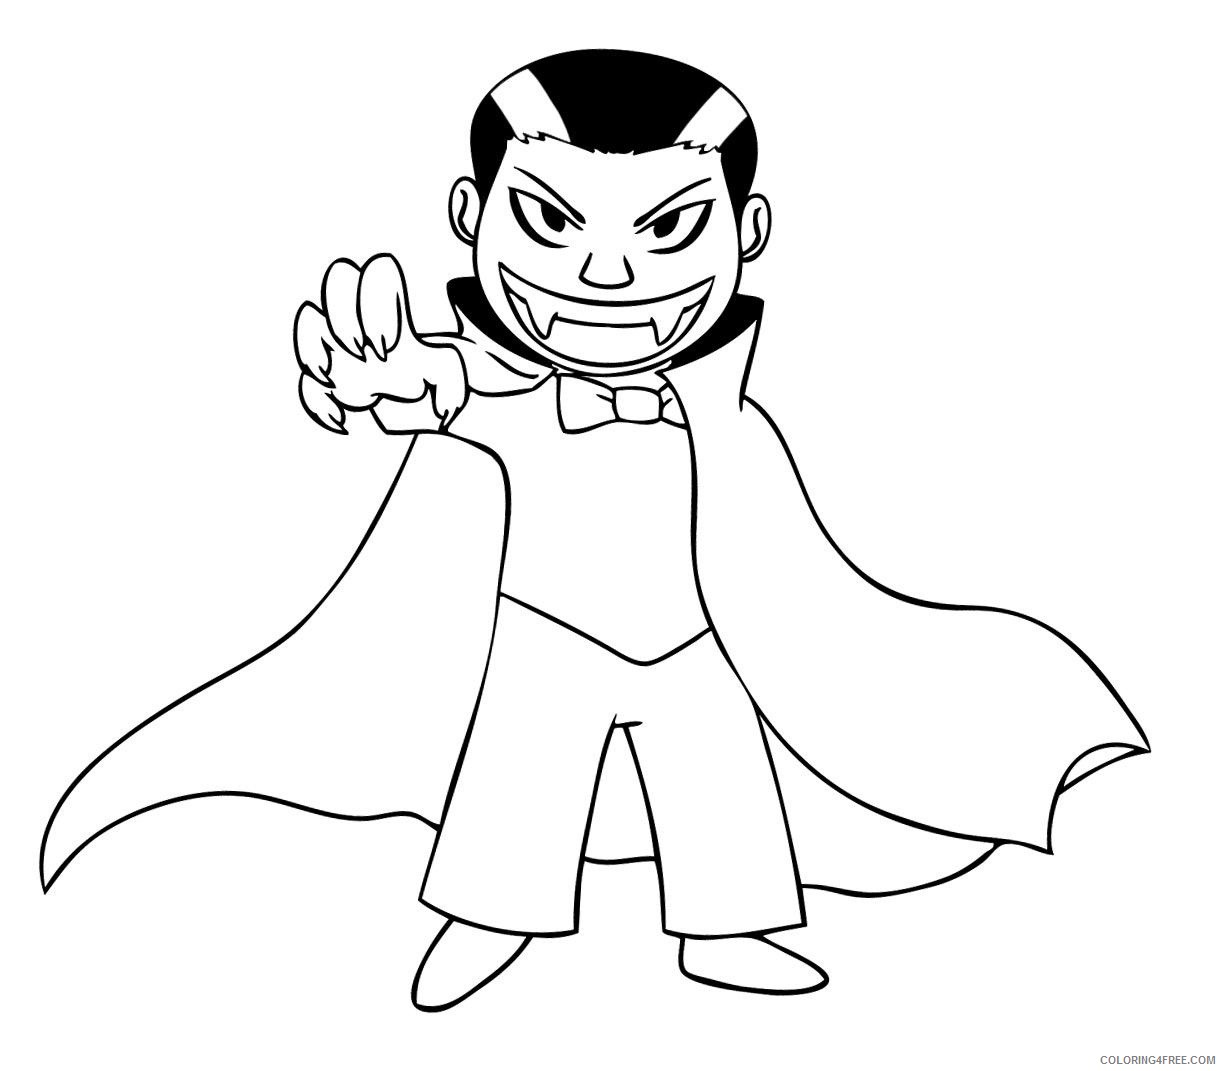 vampire coloring pages for boys Coloring4free